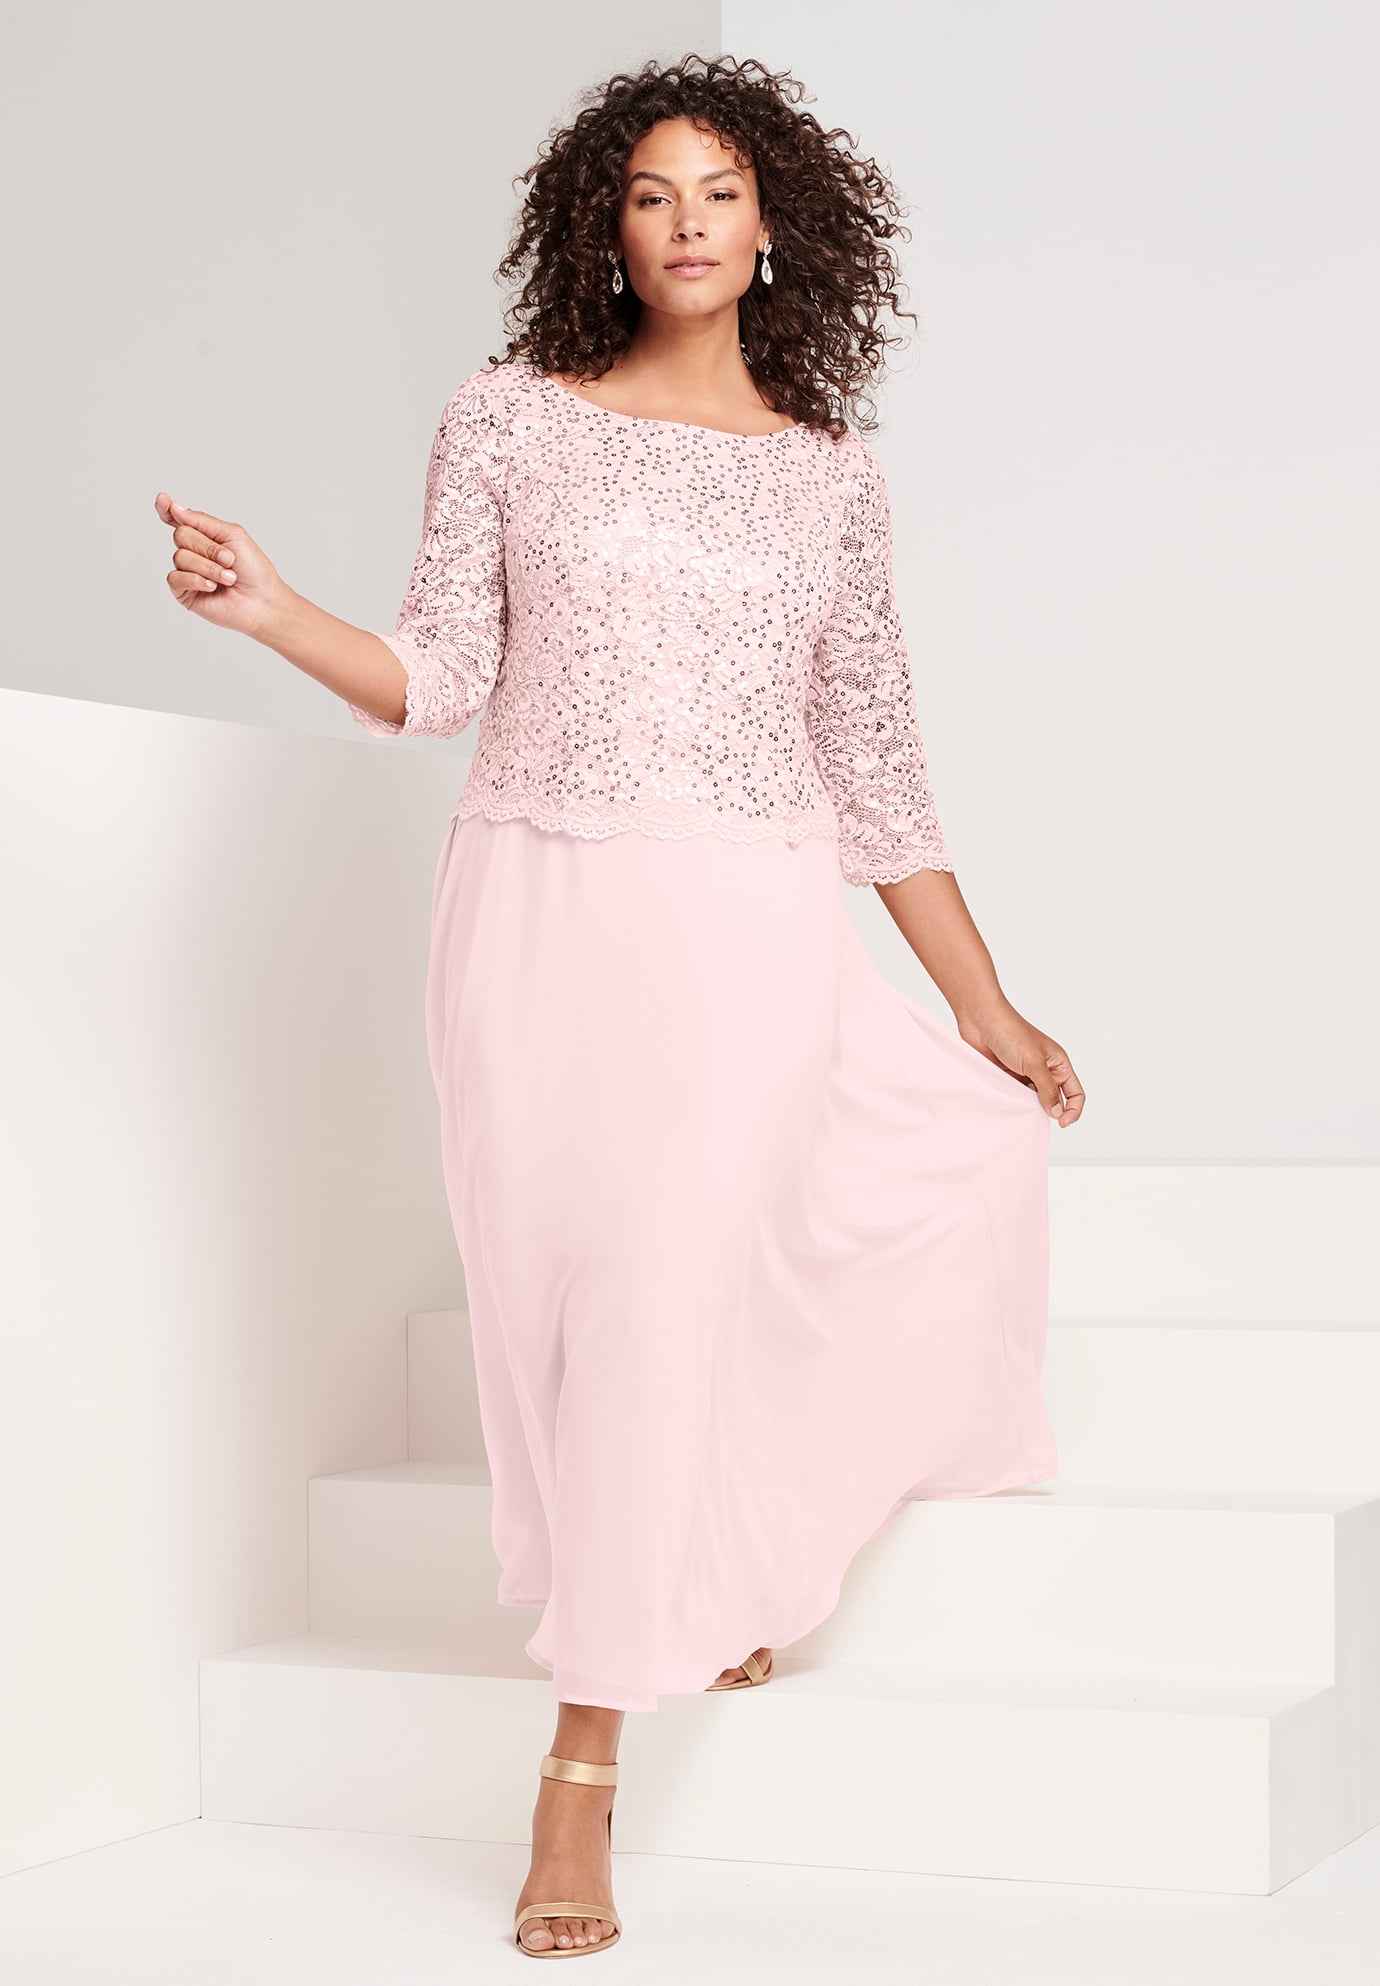 Lace Popover Dress Formal Evening ...